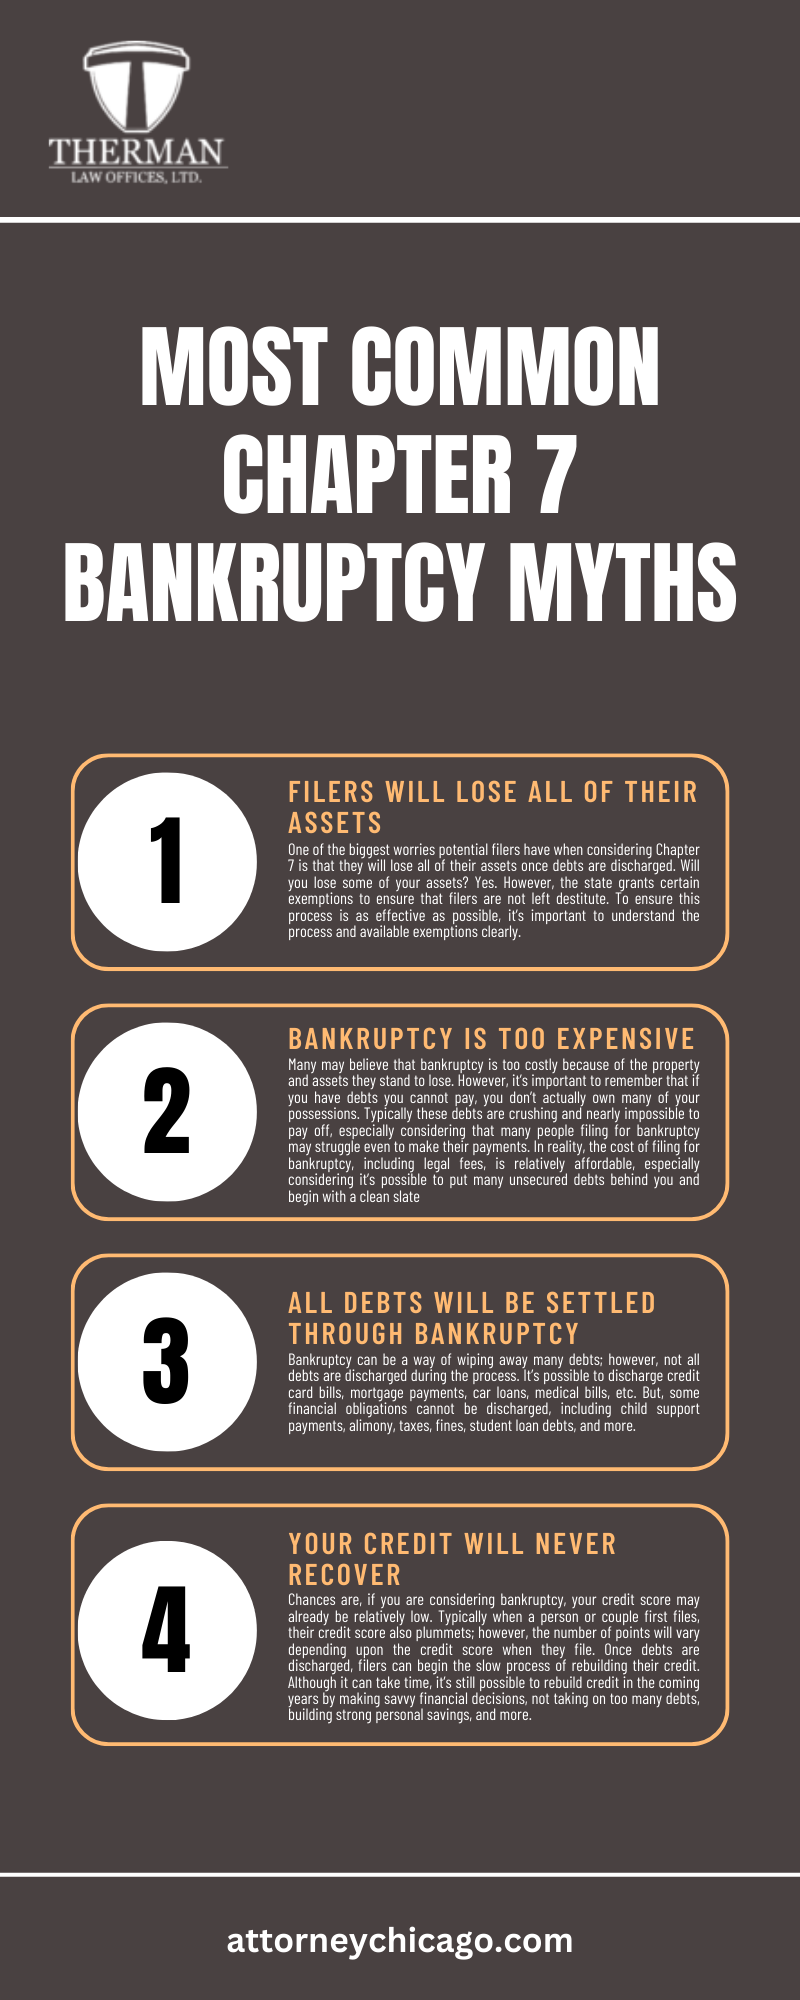 Most Common Chapter 7 Bankruptcy Myths Infographic